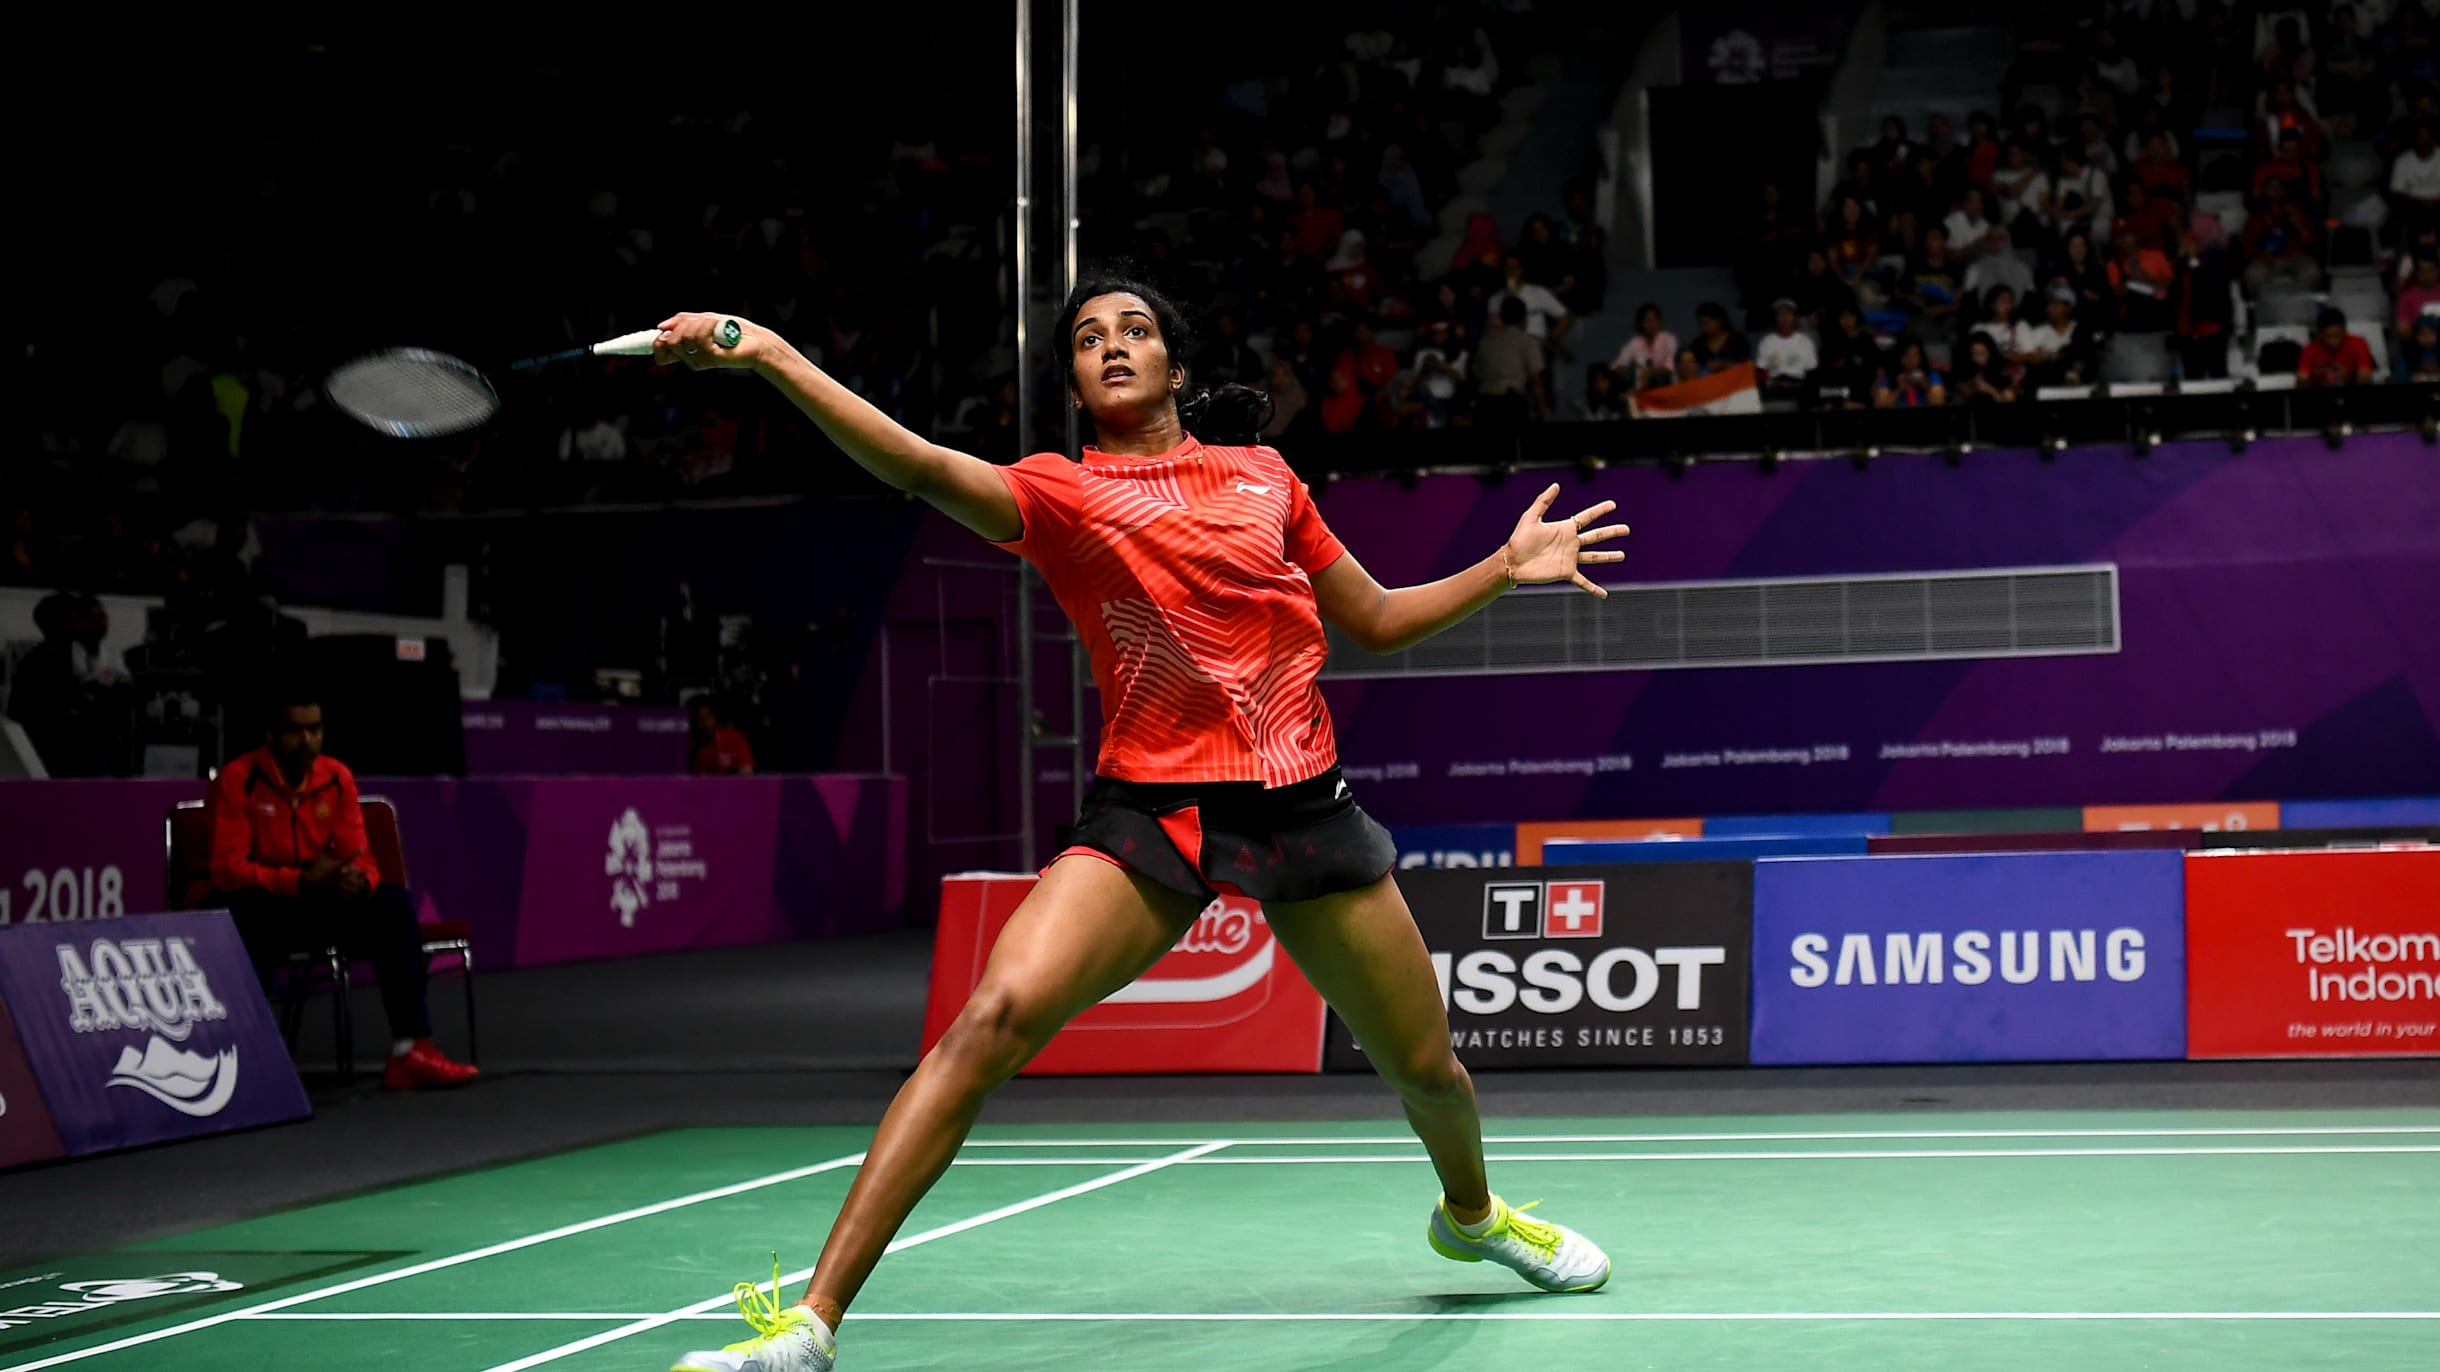 Malaysia Open badminton 2022 Watch live streaming and telecast in India